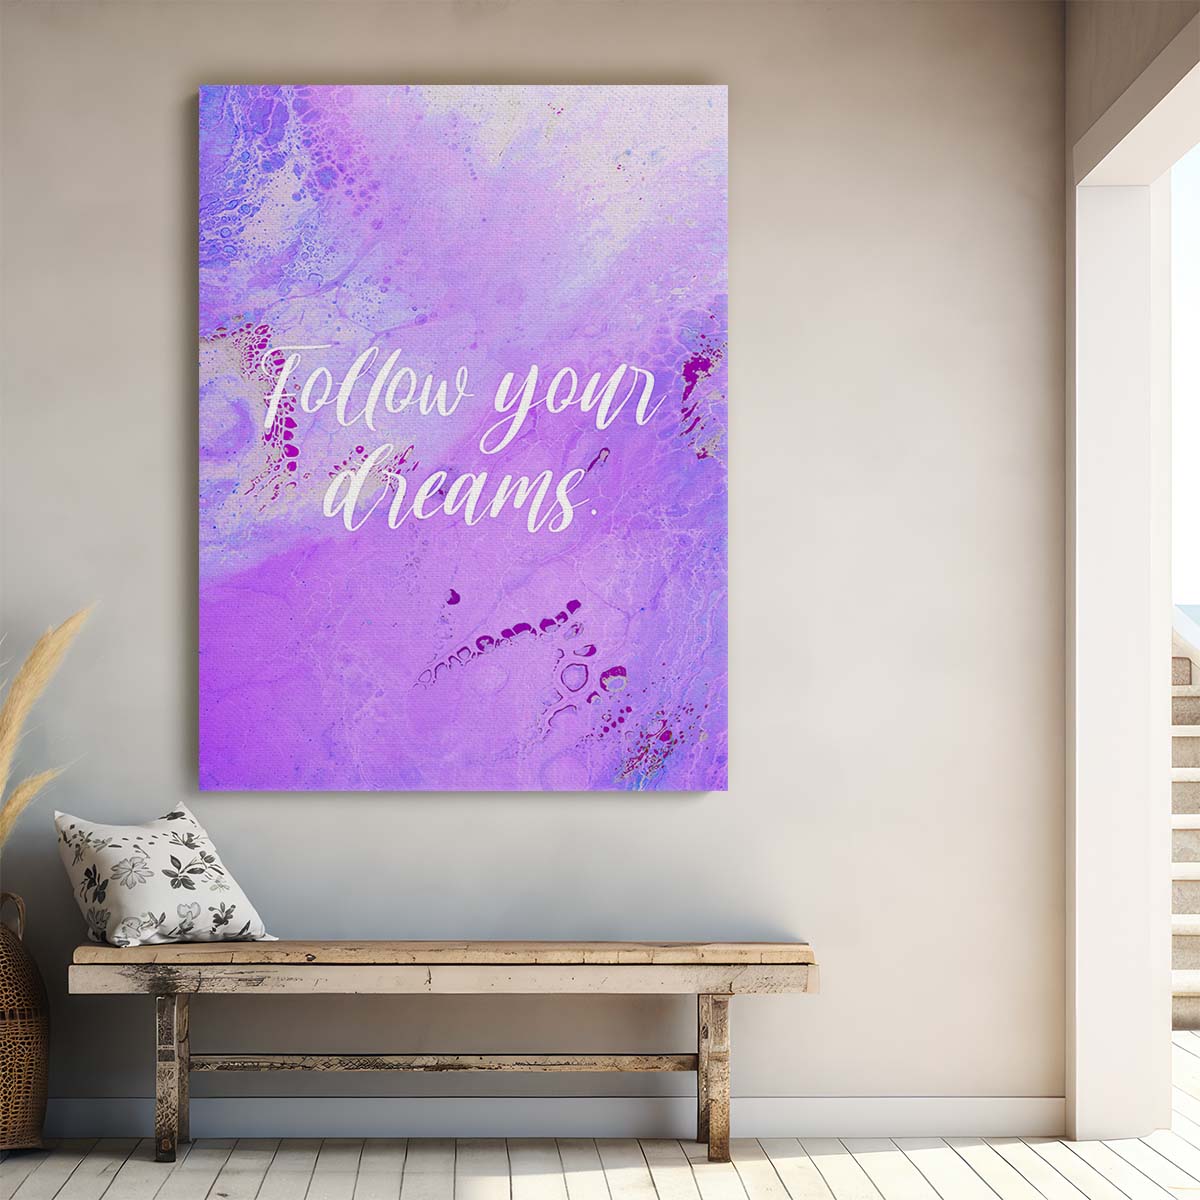 Follow Your Dreams Wall Art by Luxuriance Designs. Made in USA.